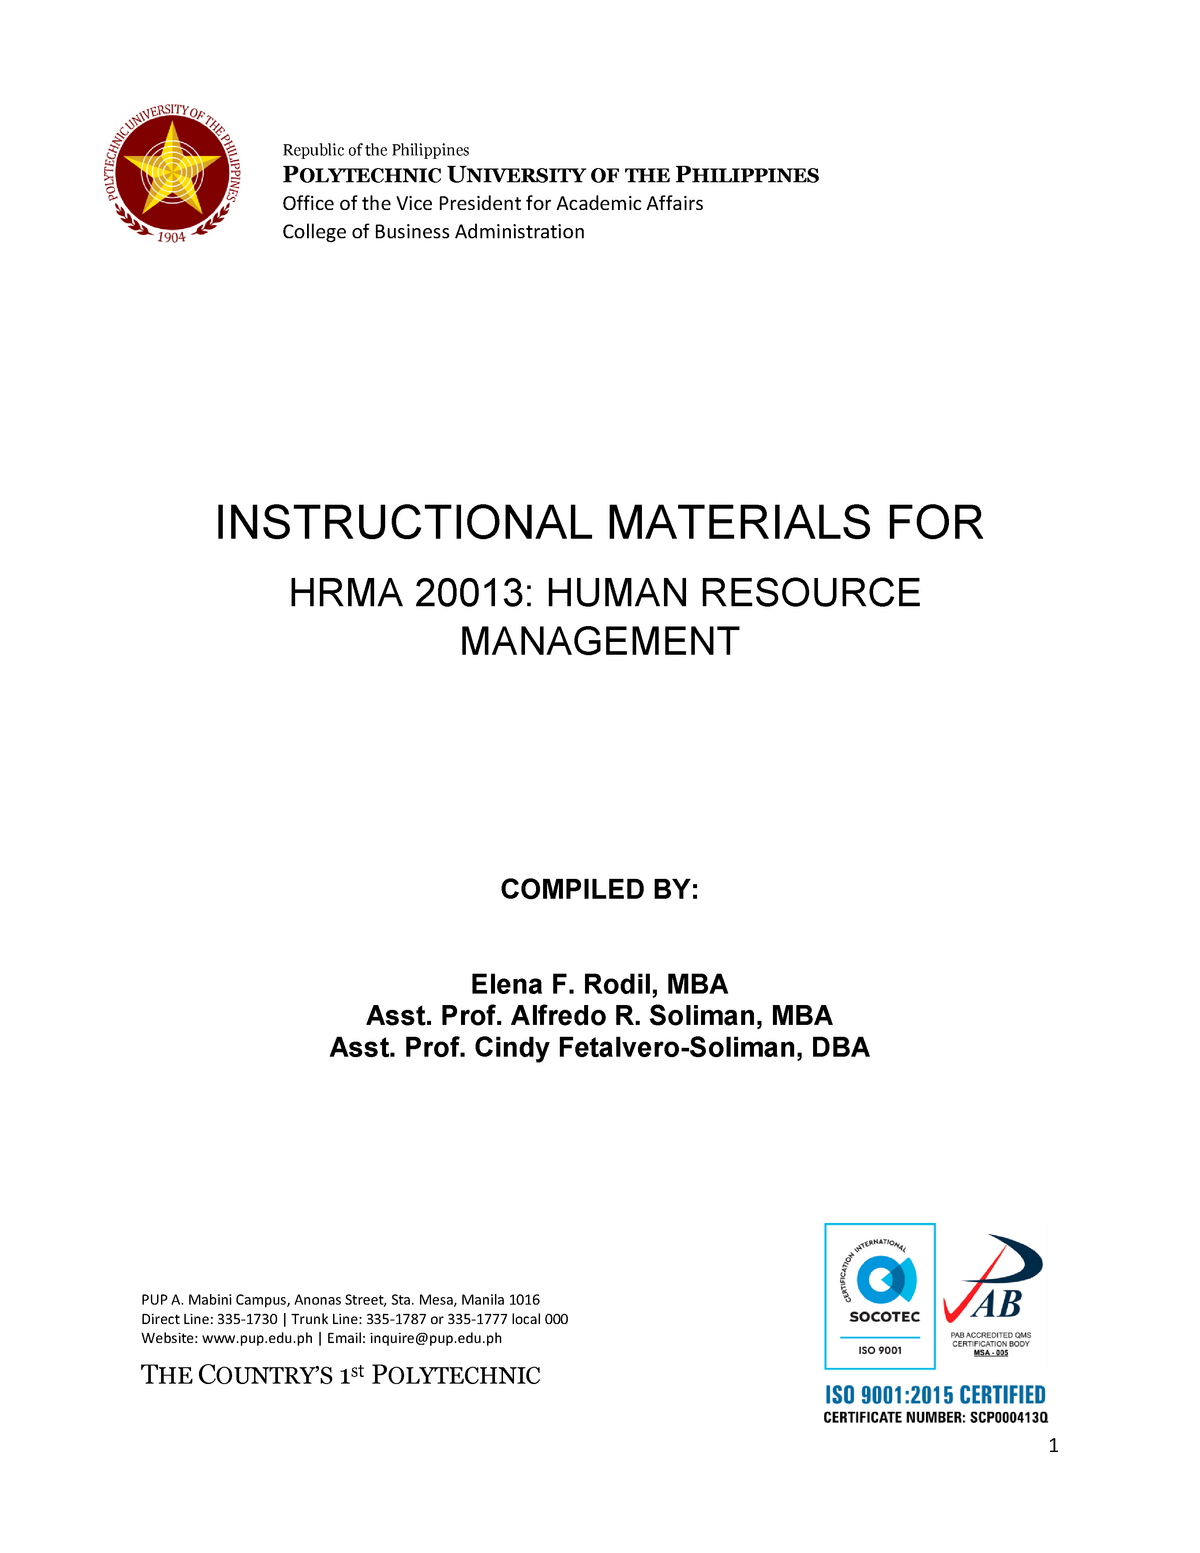 human resource management thesis philippines